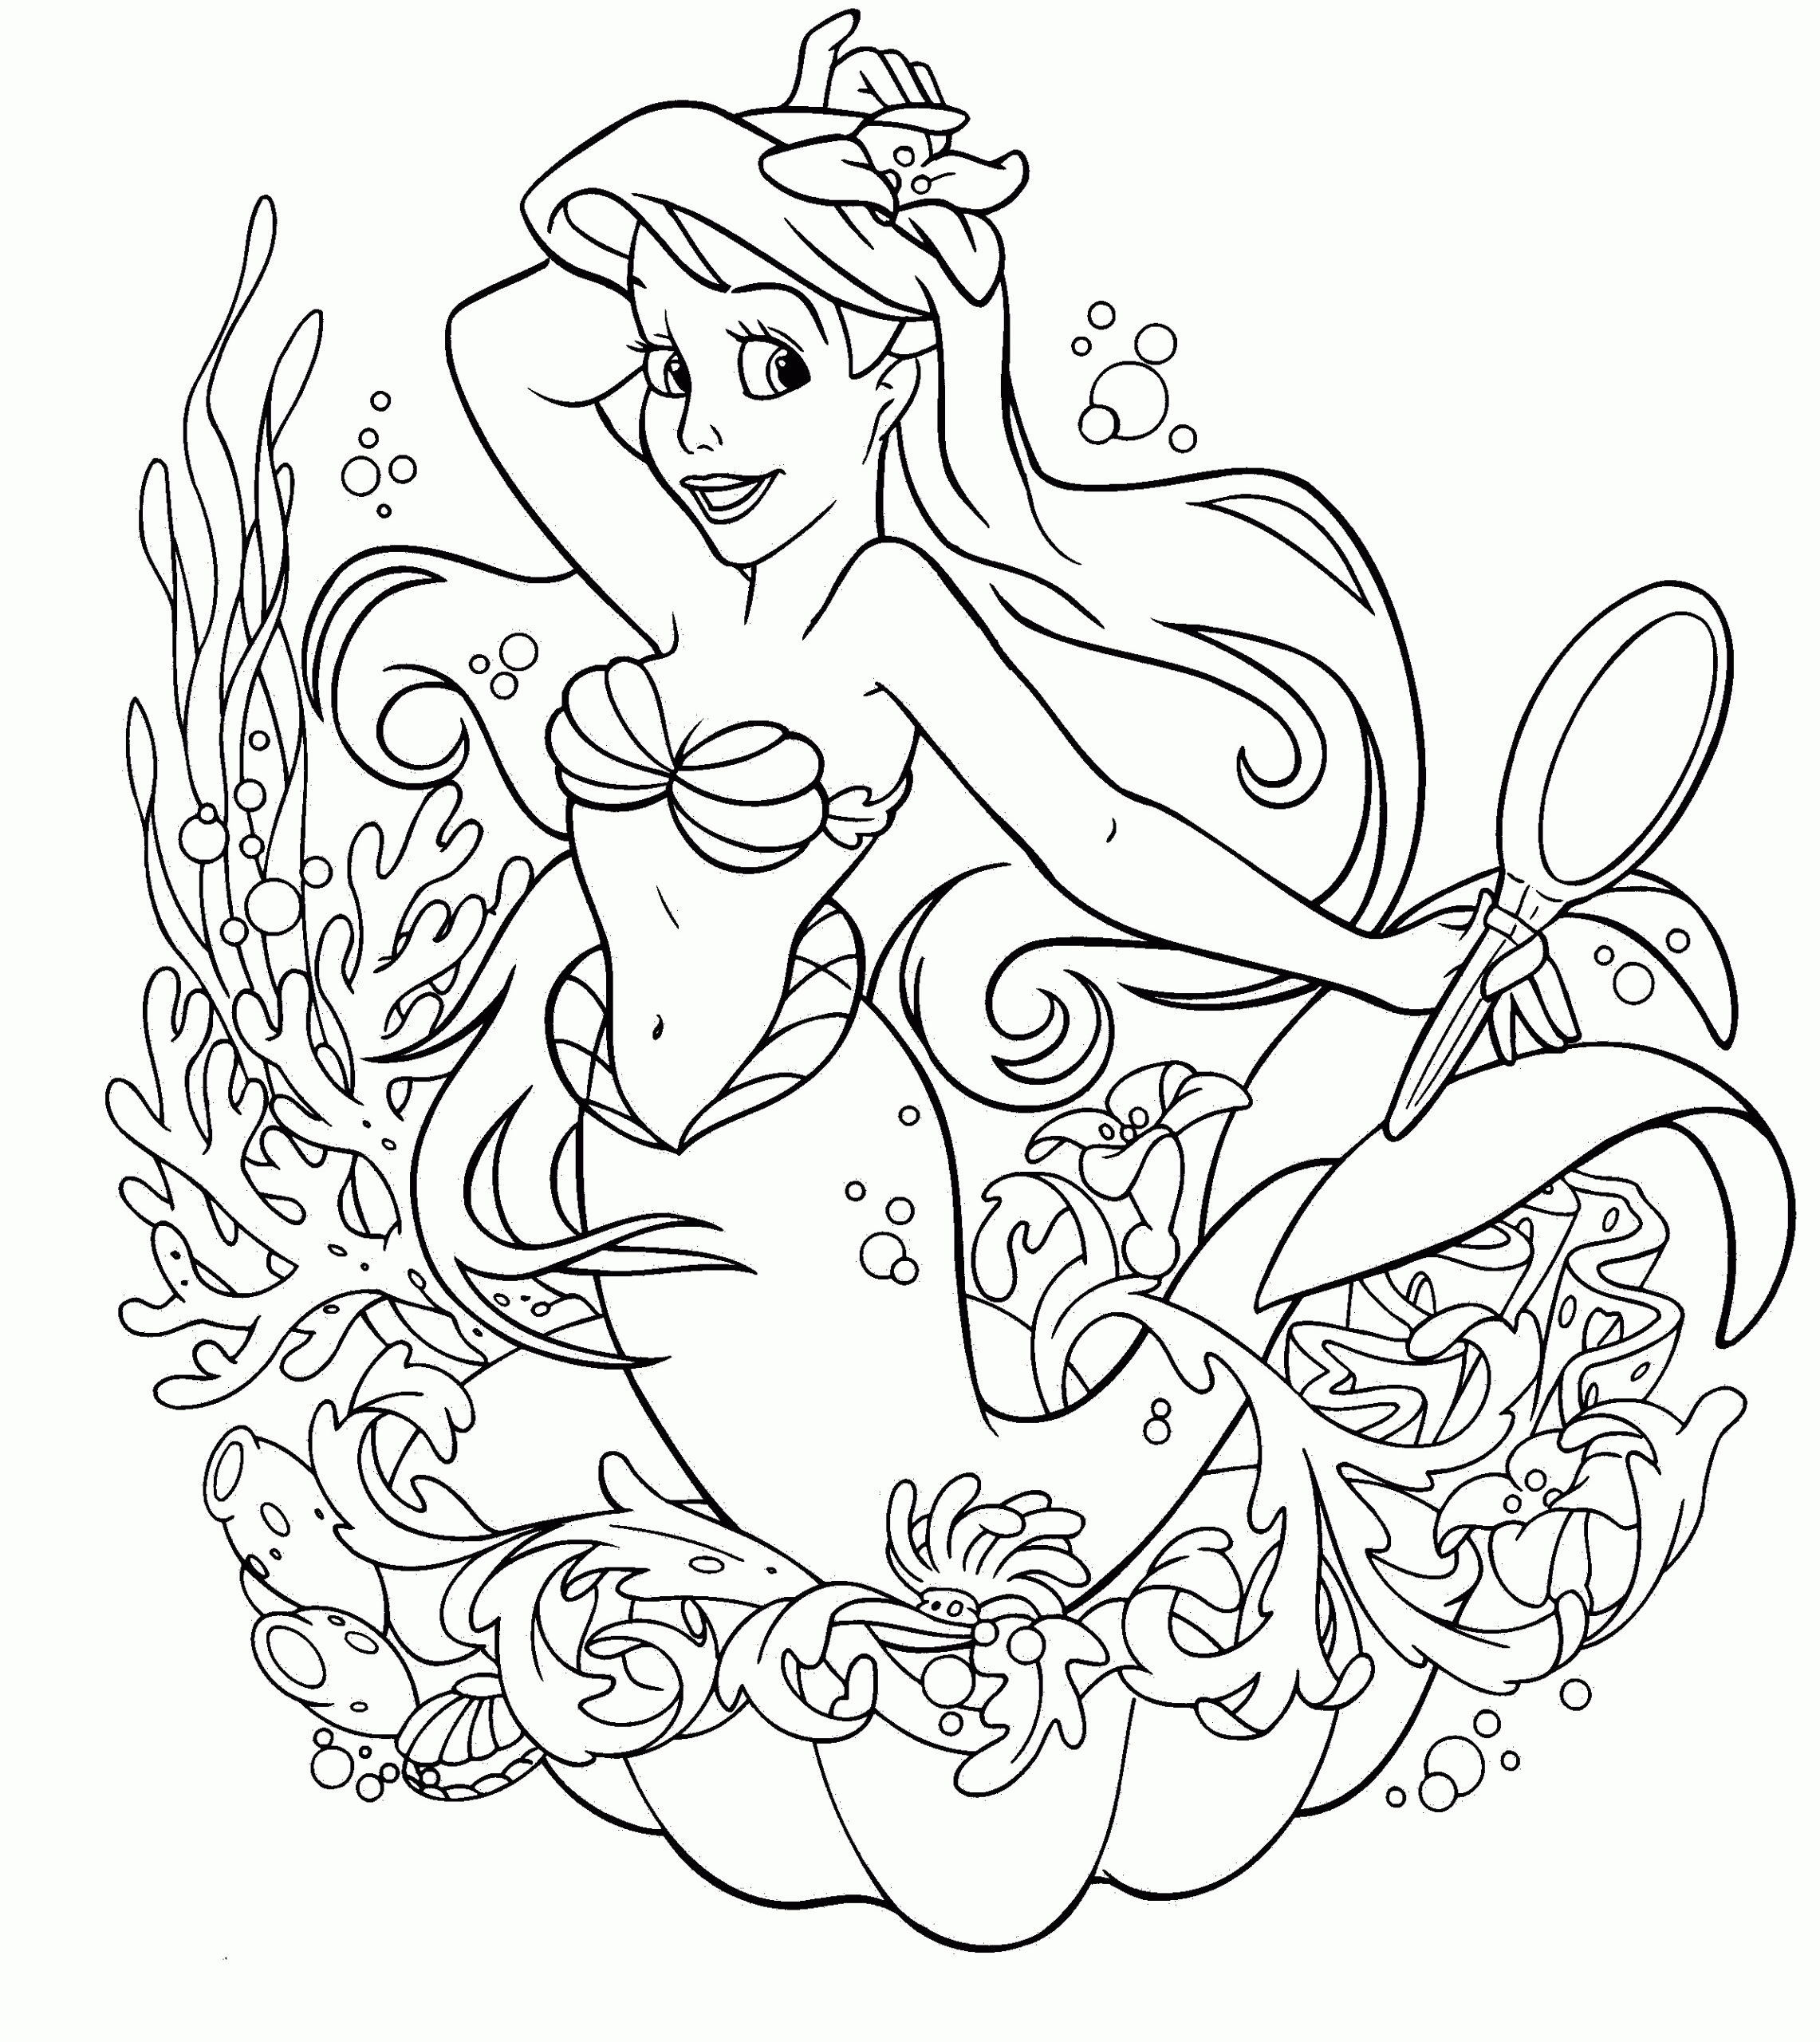 Princess Coloring Sheets For Girls
 1000 images about Colouring on Pinterest